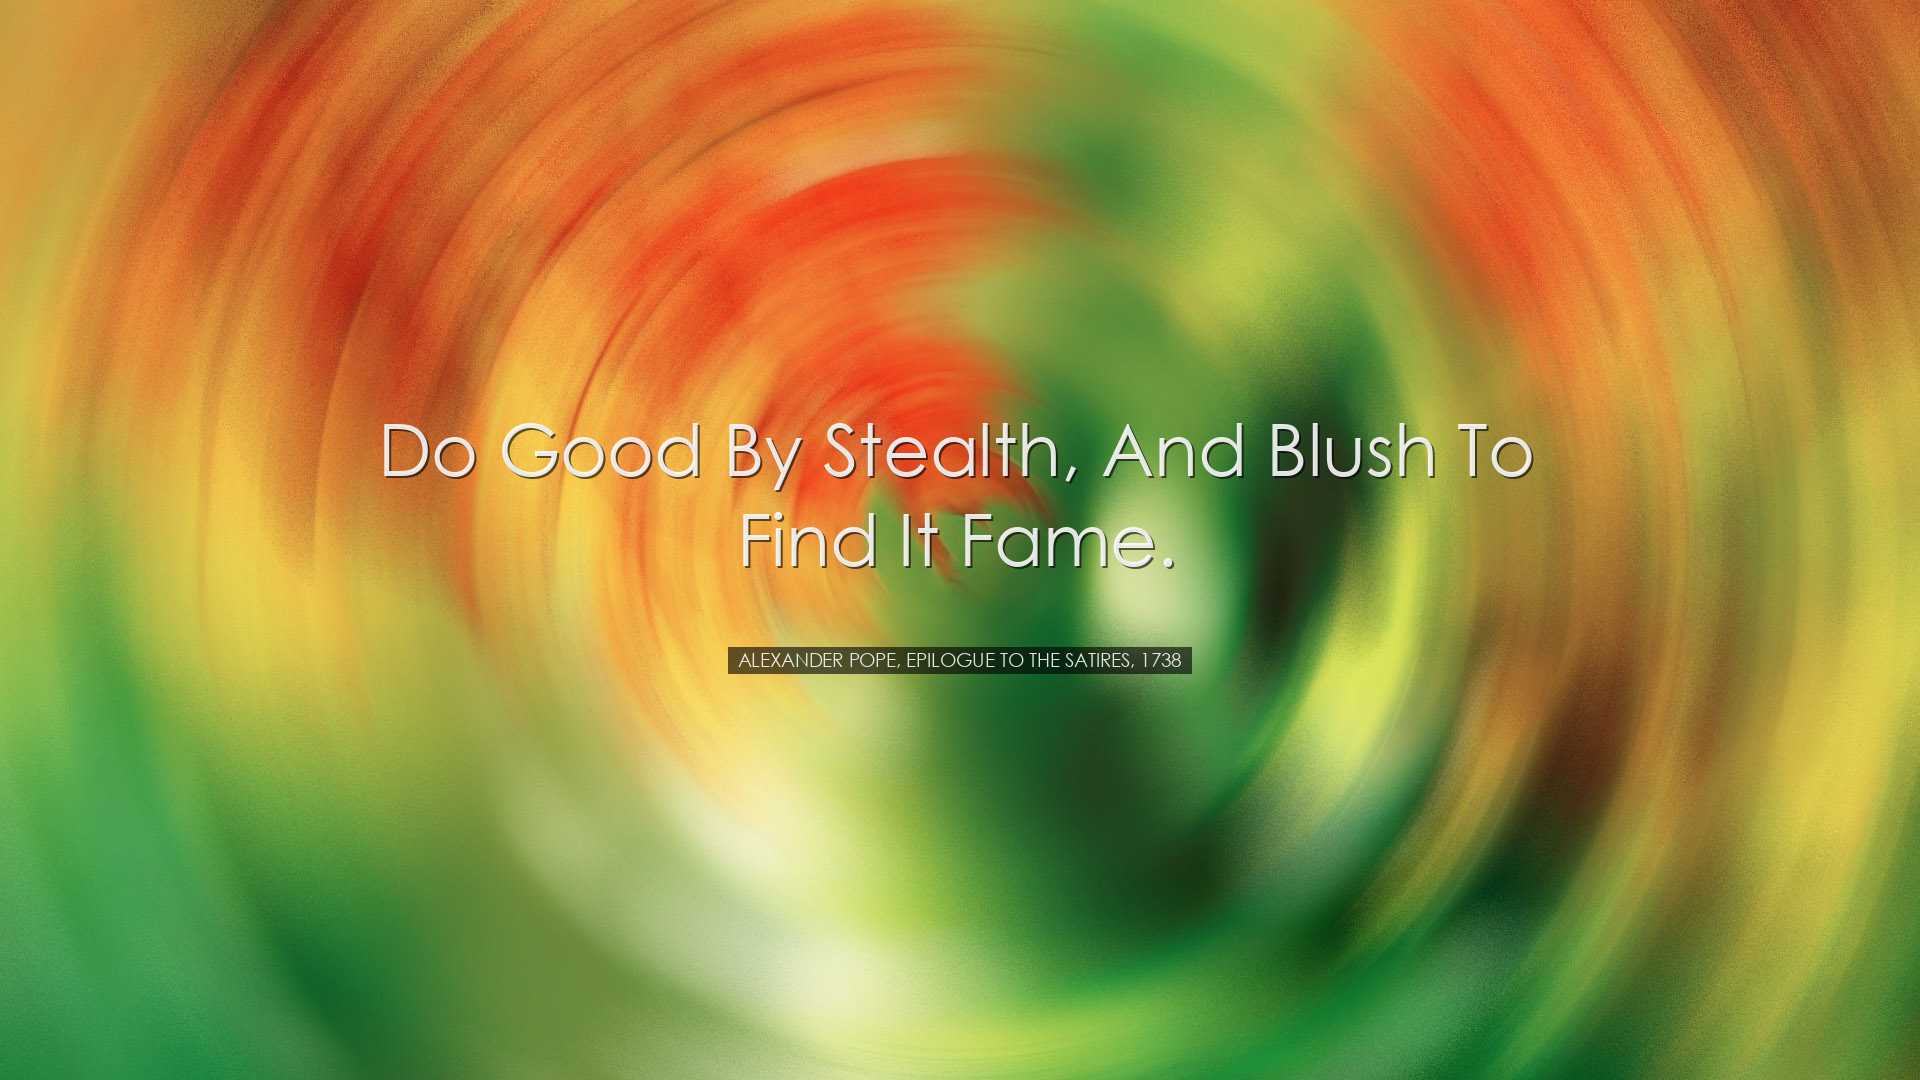 Do good by stealth, and blush to find it fame. - Alexander Pope, E